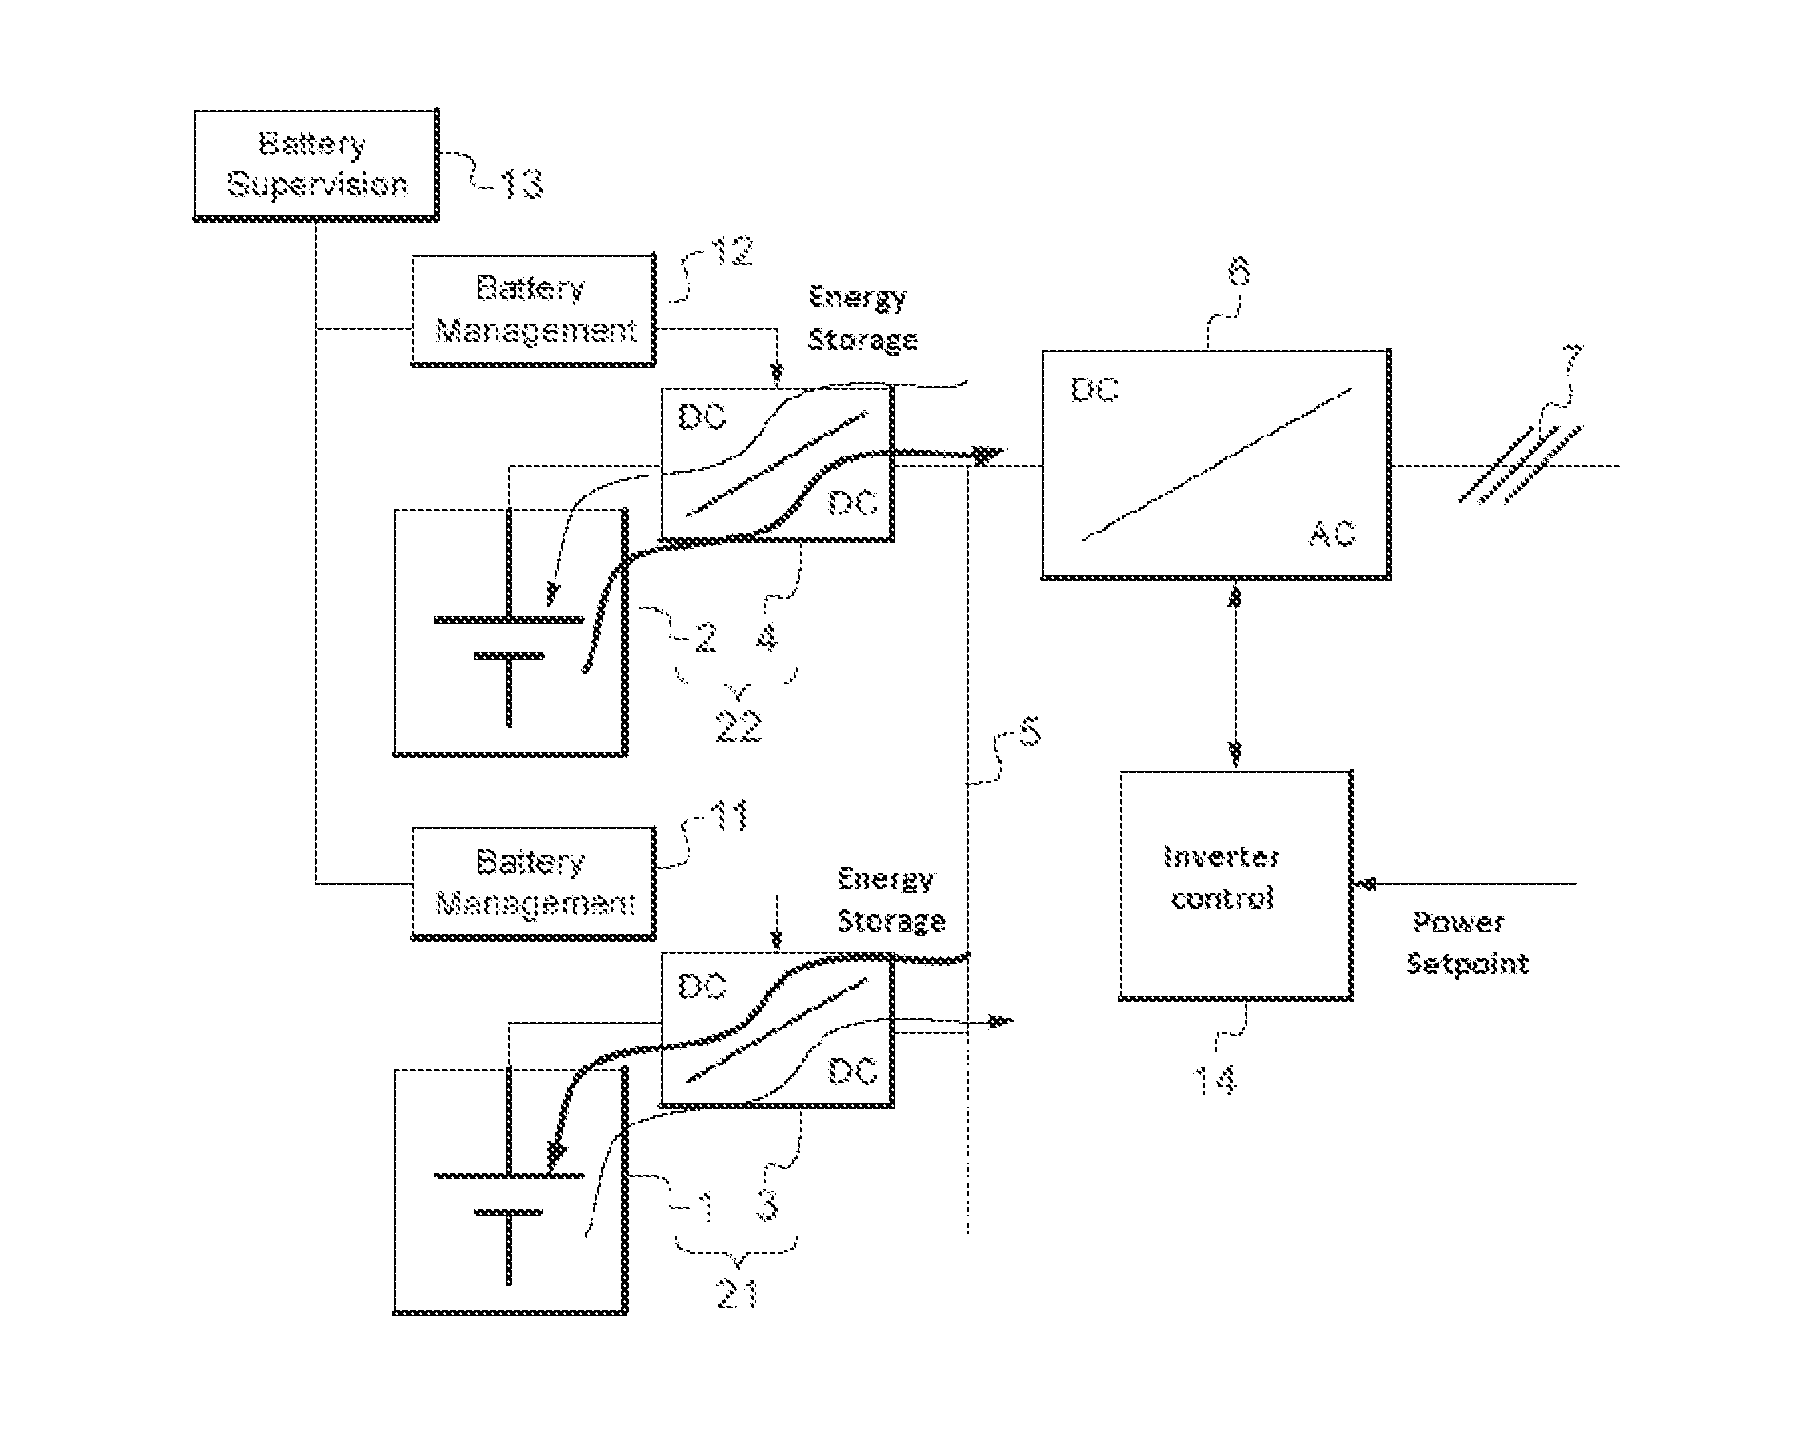 Electric energy storage system comprising an inverter